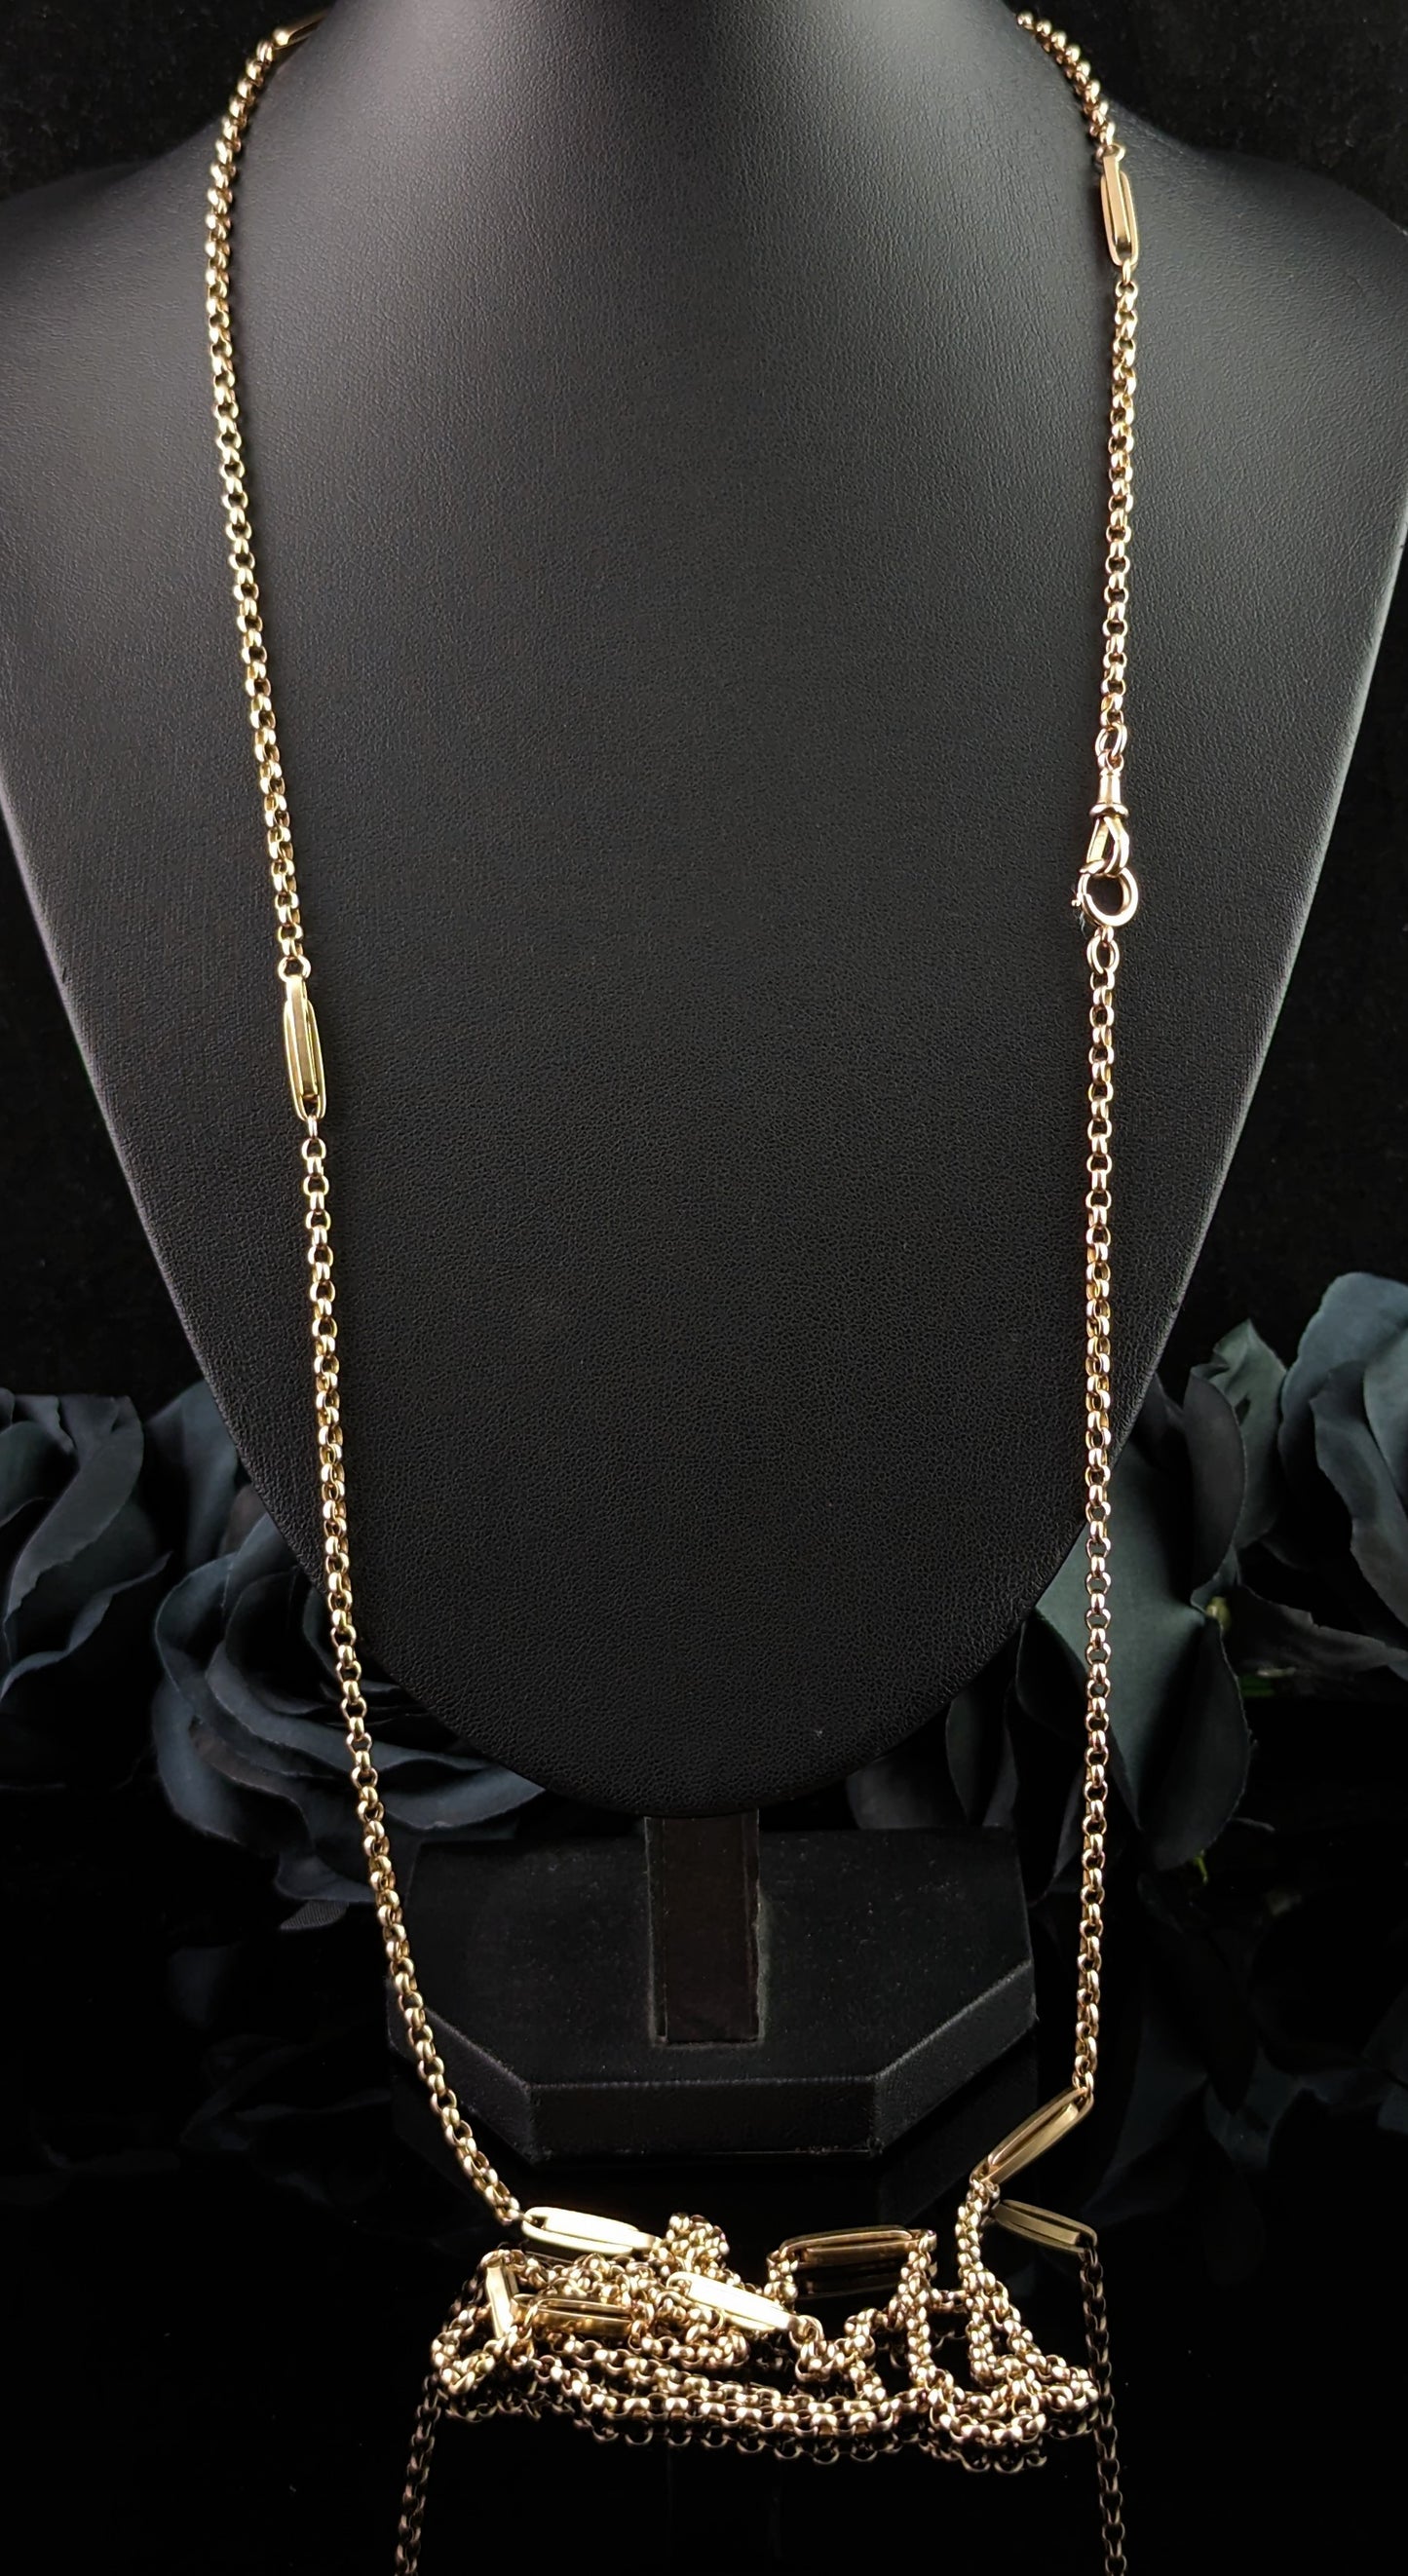 Antique 9ct gold fancy link long chain necklace, guard chain, Victorian